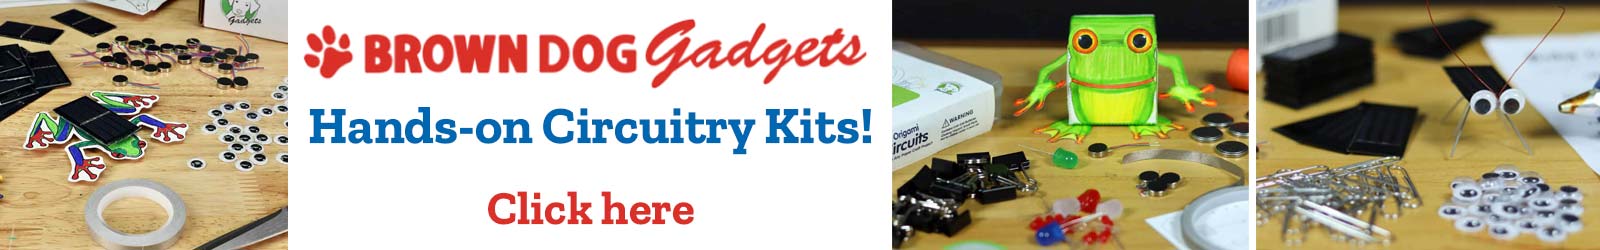 Browndog gadgets Hands-on Circuitry Kits!